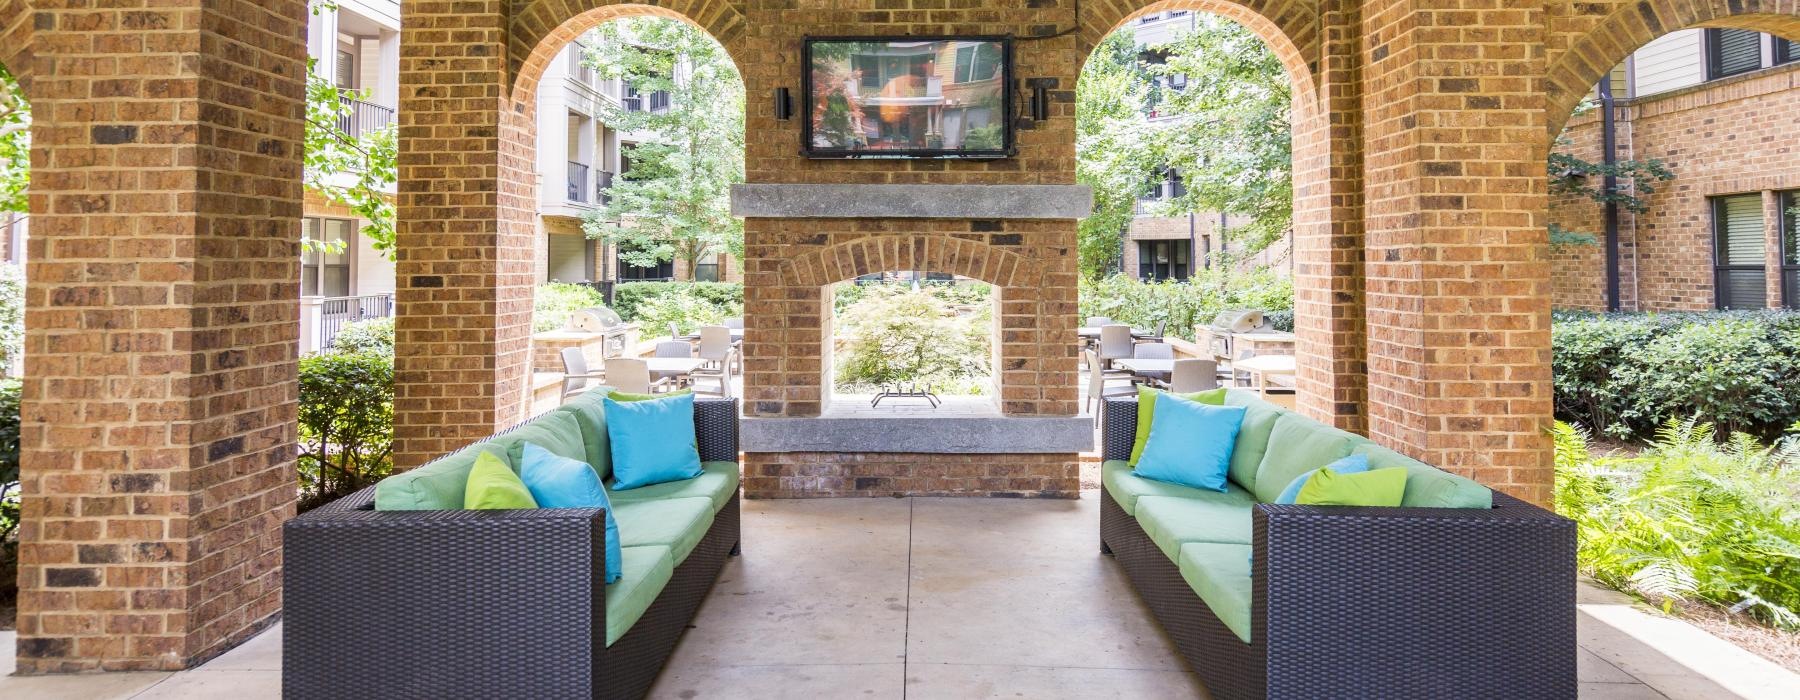 Outdoor lounge and media space